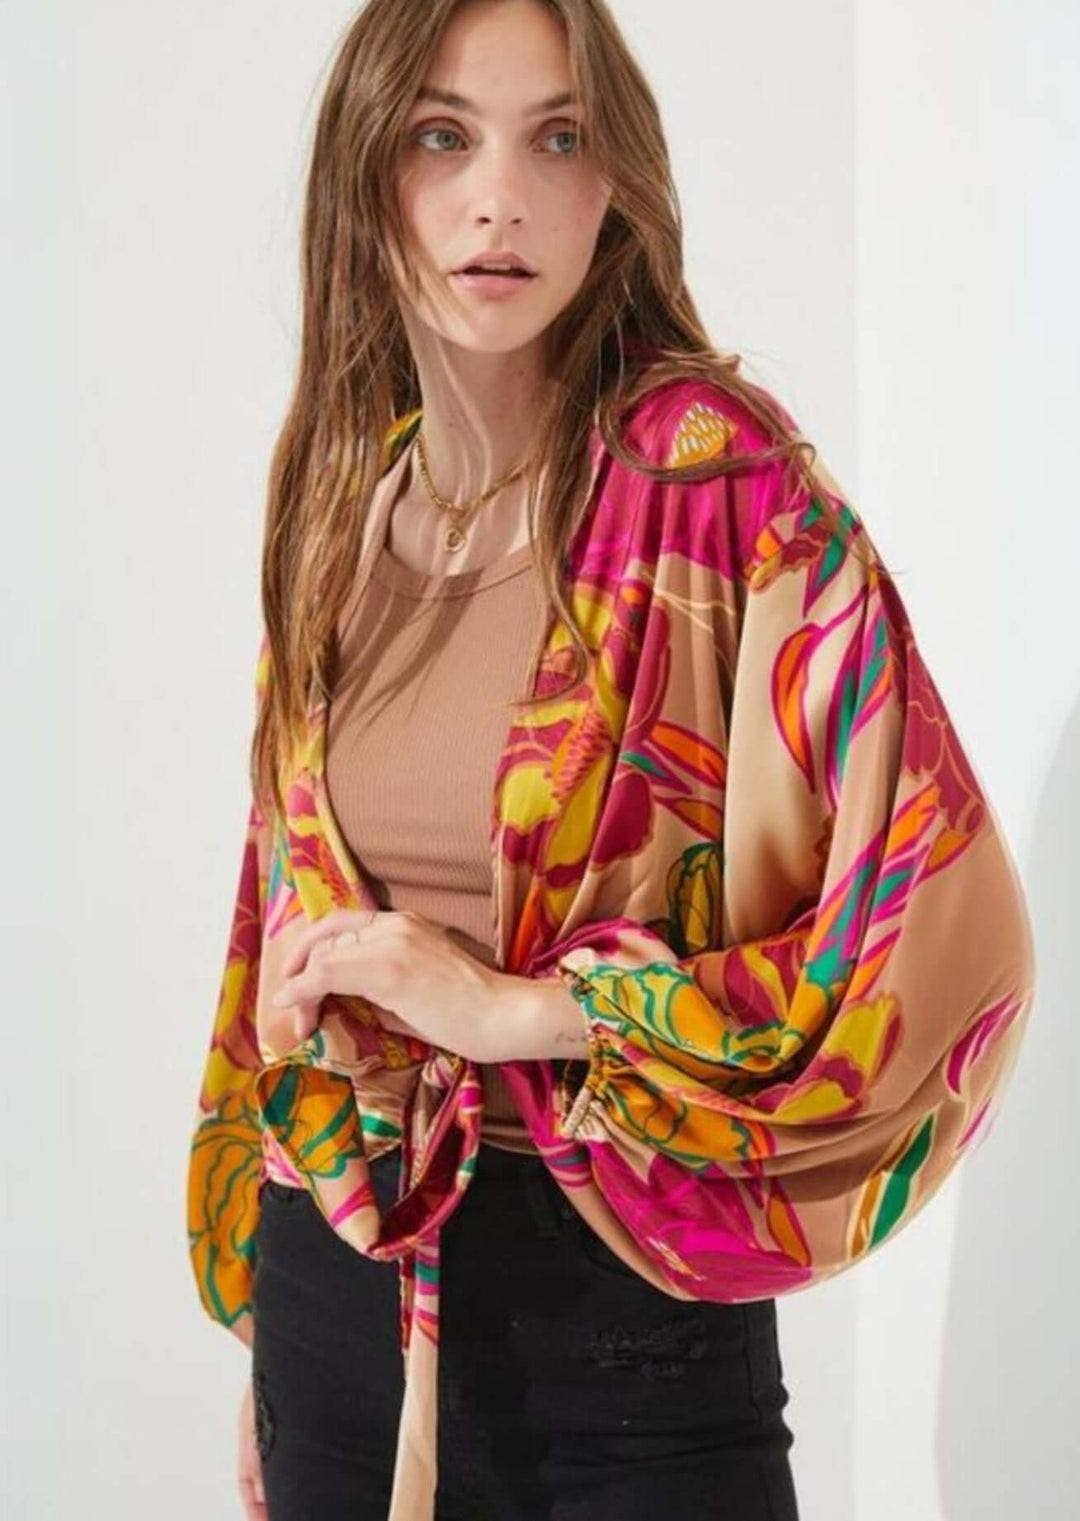 Made in USA Women's Tie Front Floral Kimono Cardigan with Puff Sleeves in Taupe, Fuchsia, Mustard & Green Floral Pattern | Classy Cozy Cool Women's Made in America Boutique